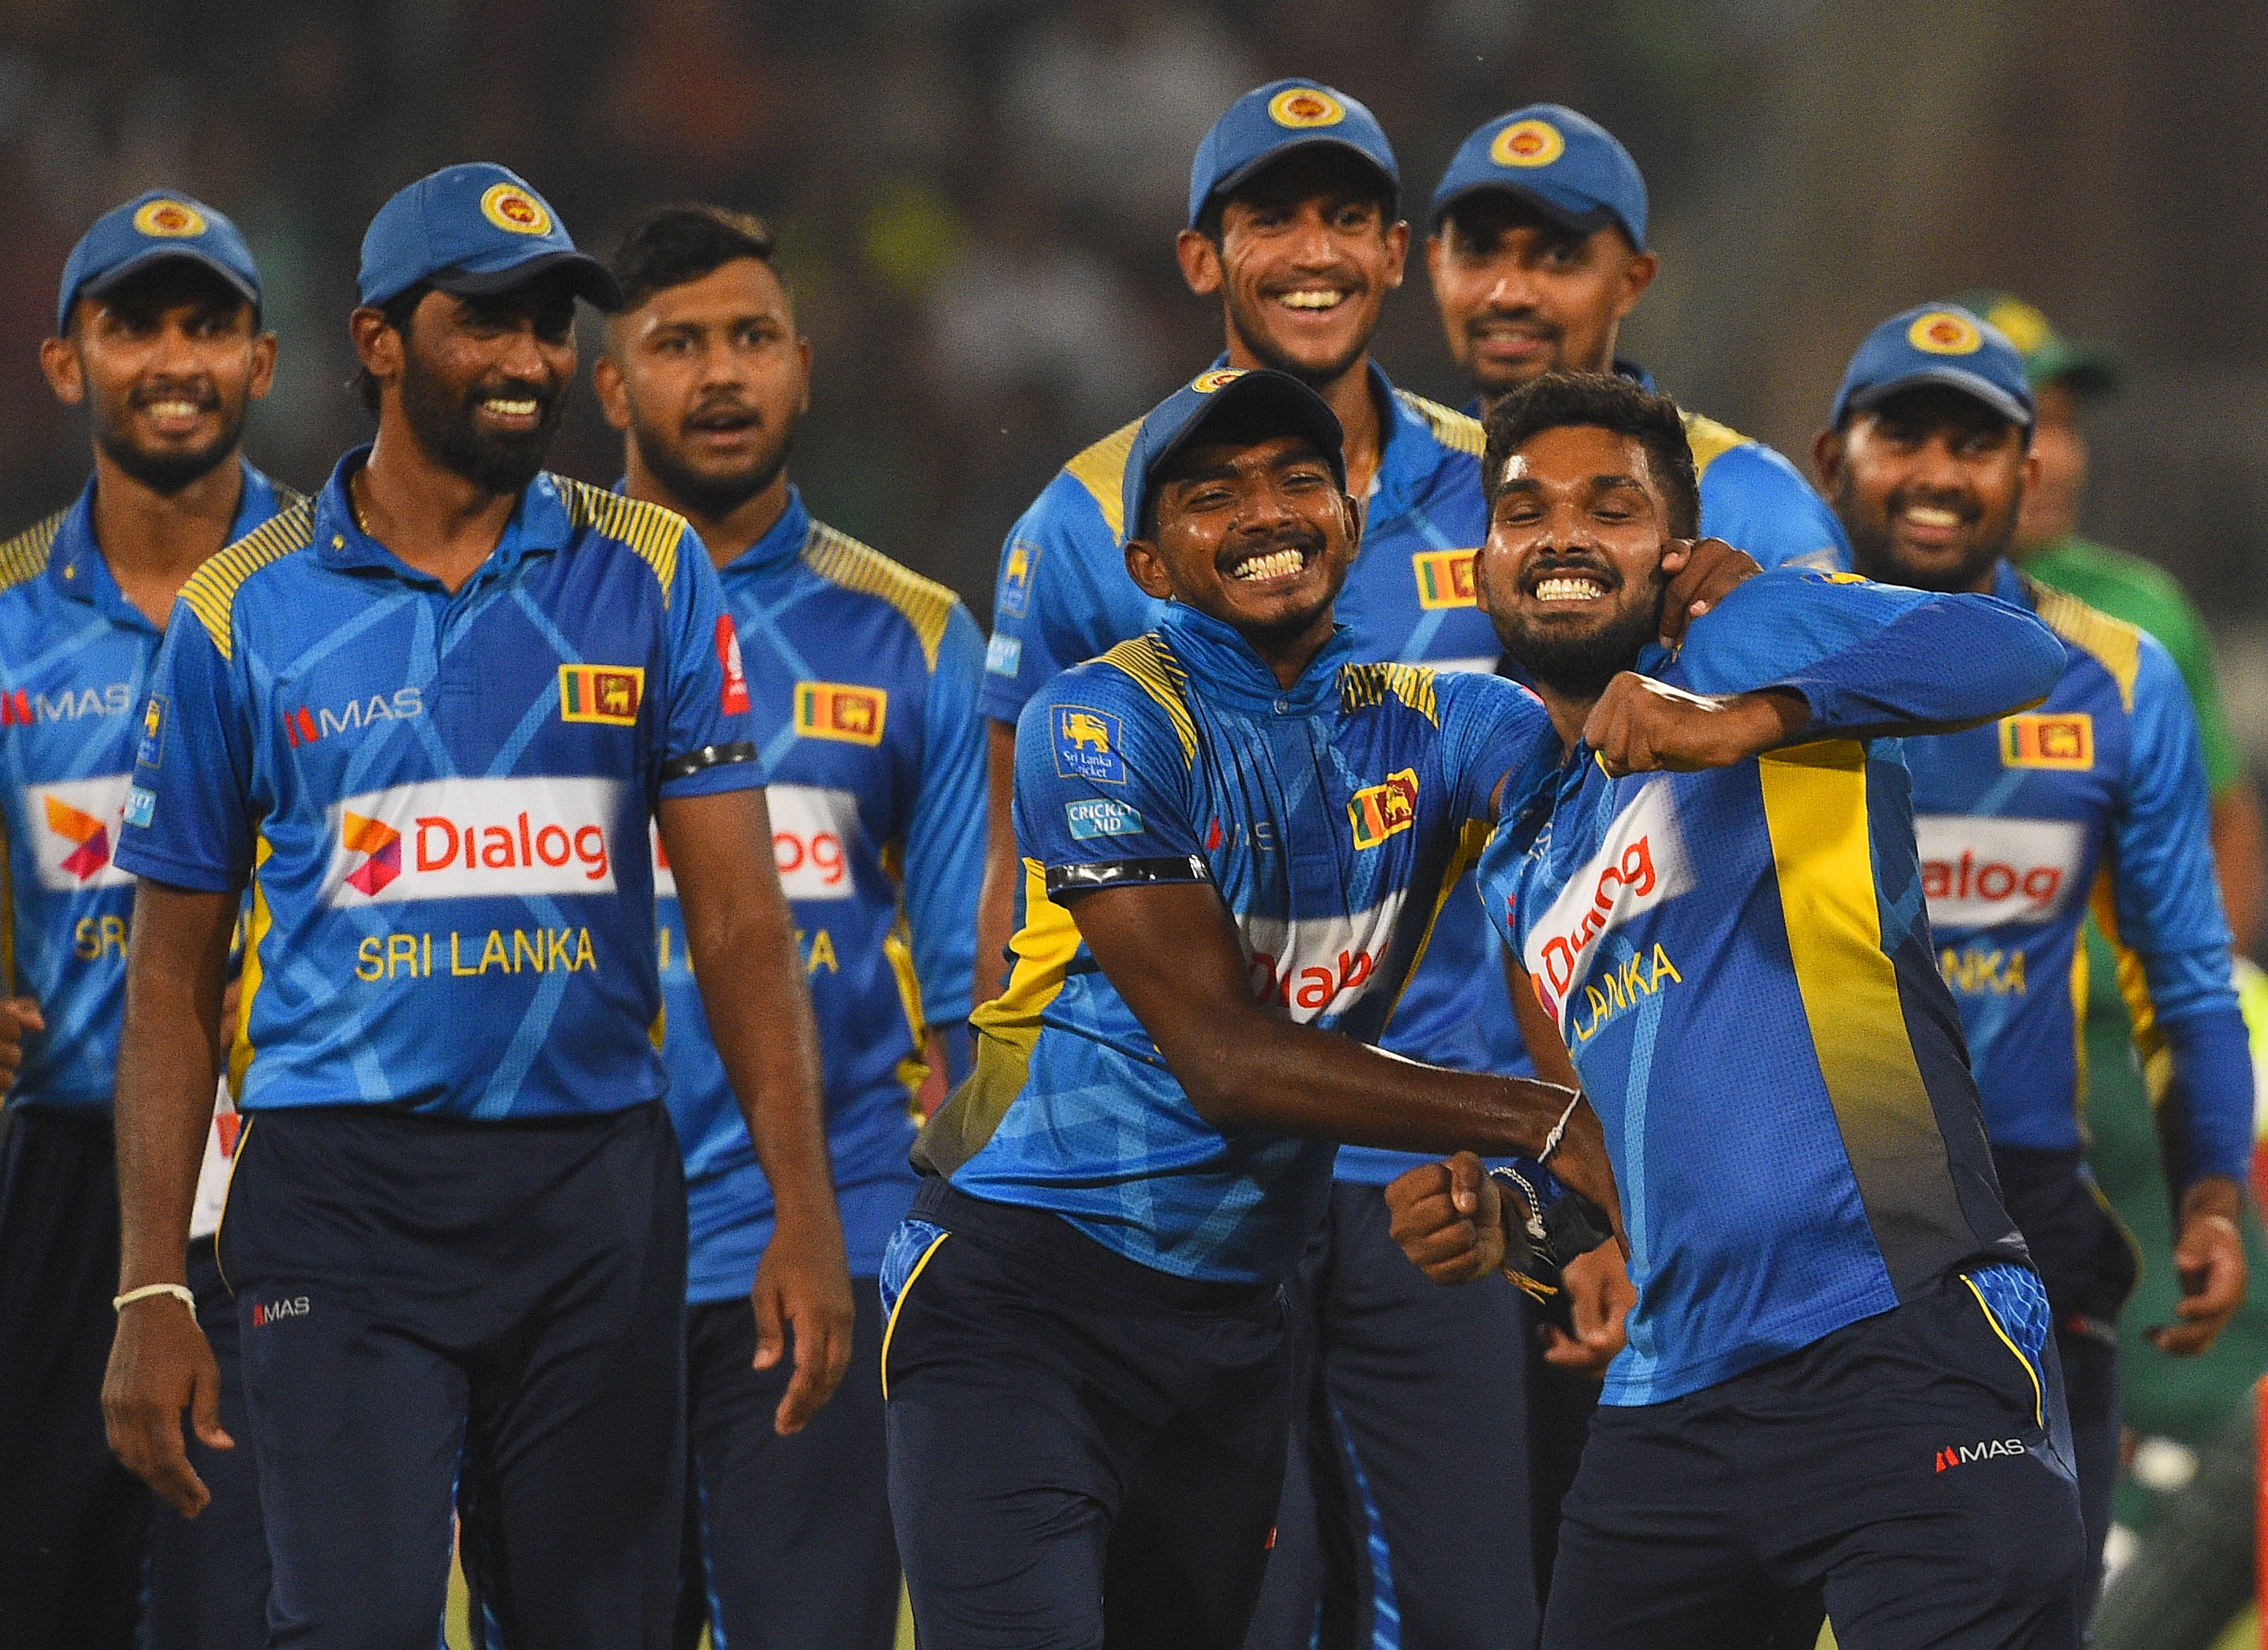 Sri Lanka second string team achieving the Impossible in Pakistan new food for thought for selectors